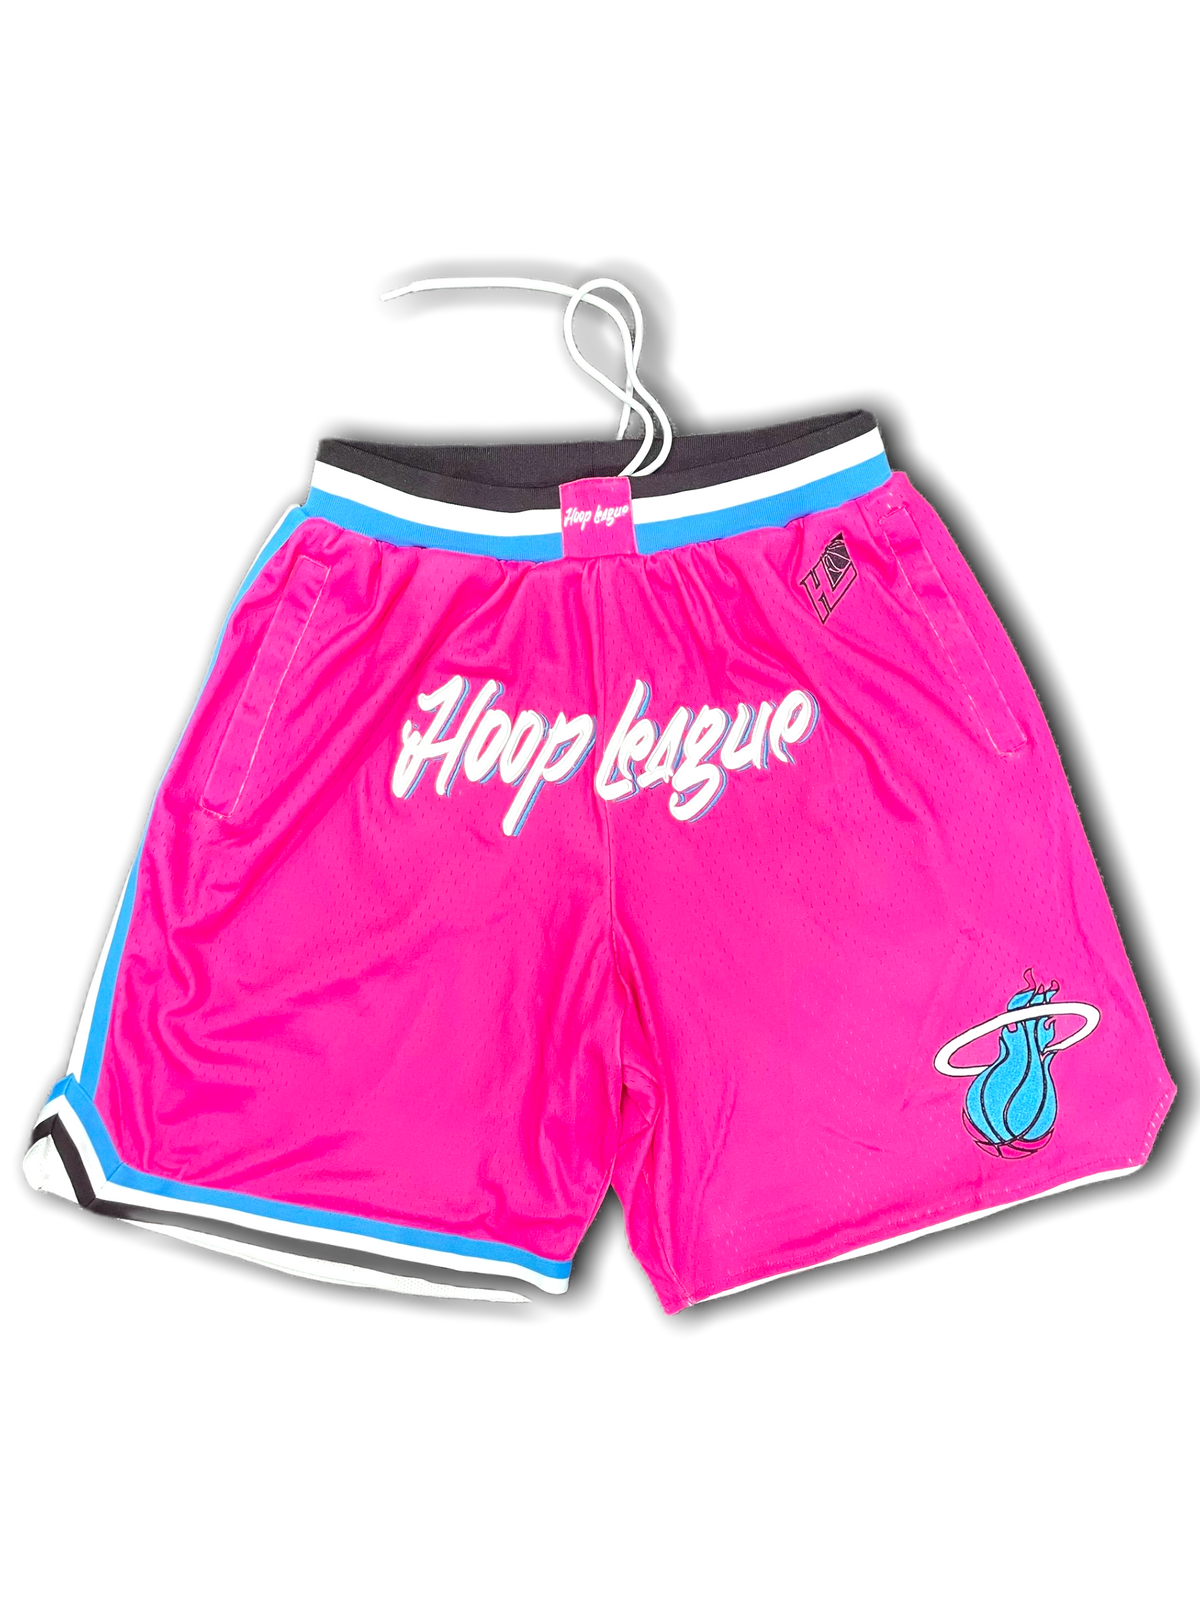 Hoop League Stitched MIA Game Ready Shorts Pink/Wht/Black